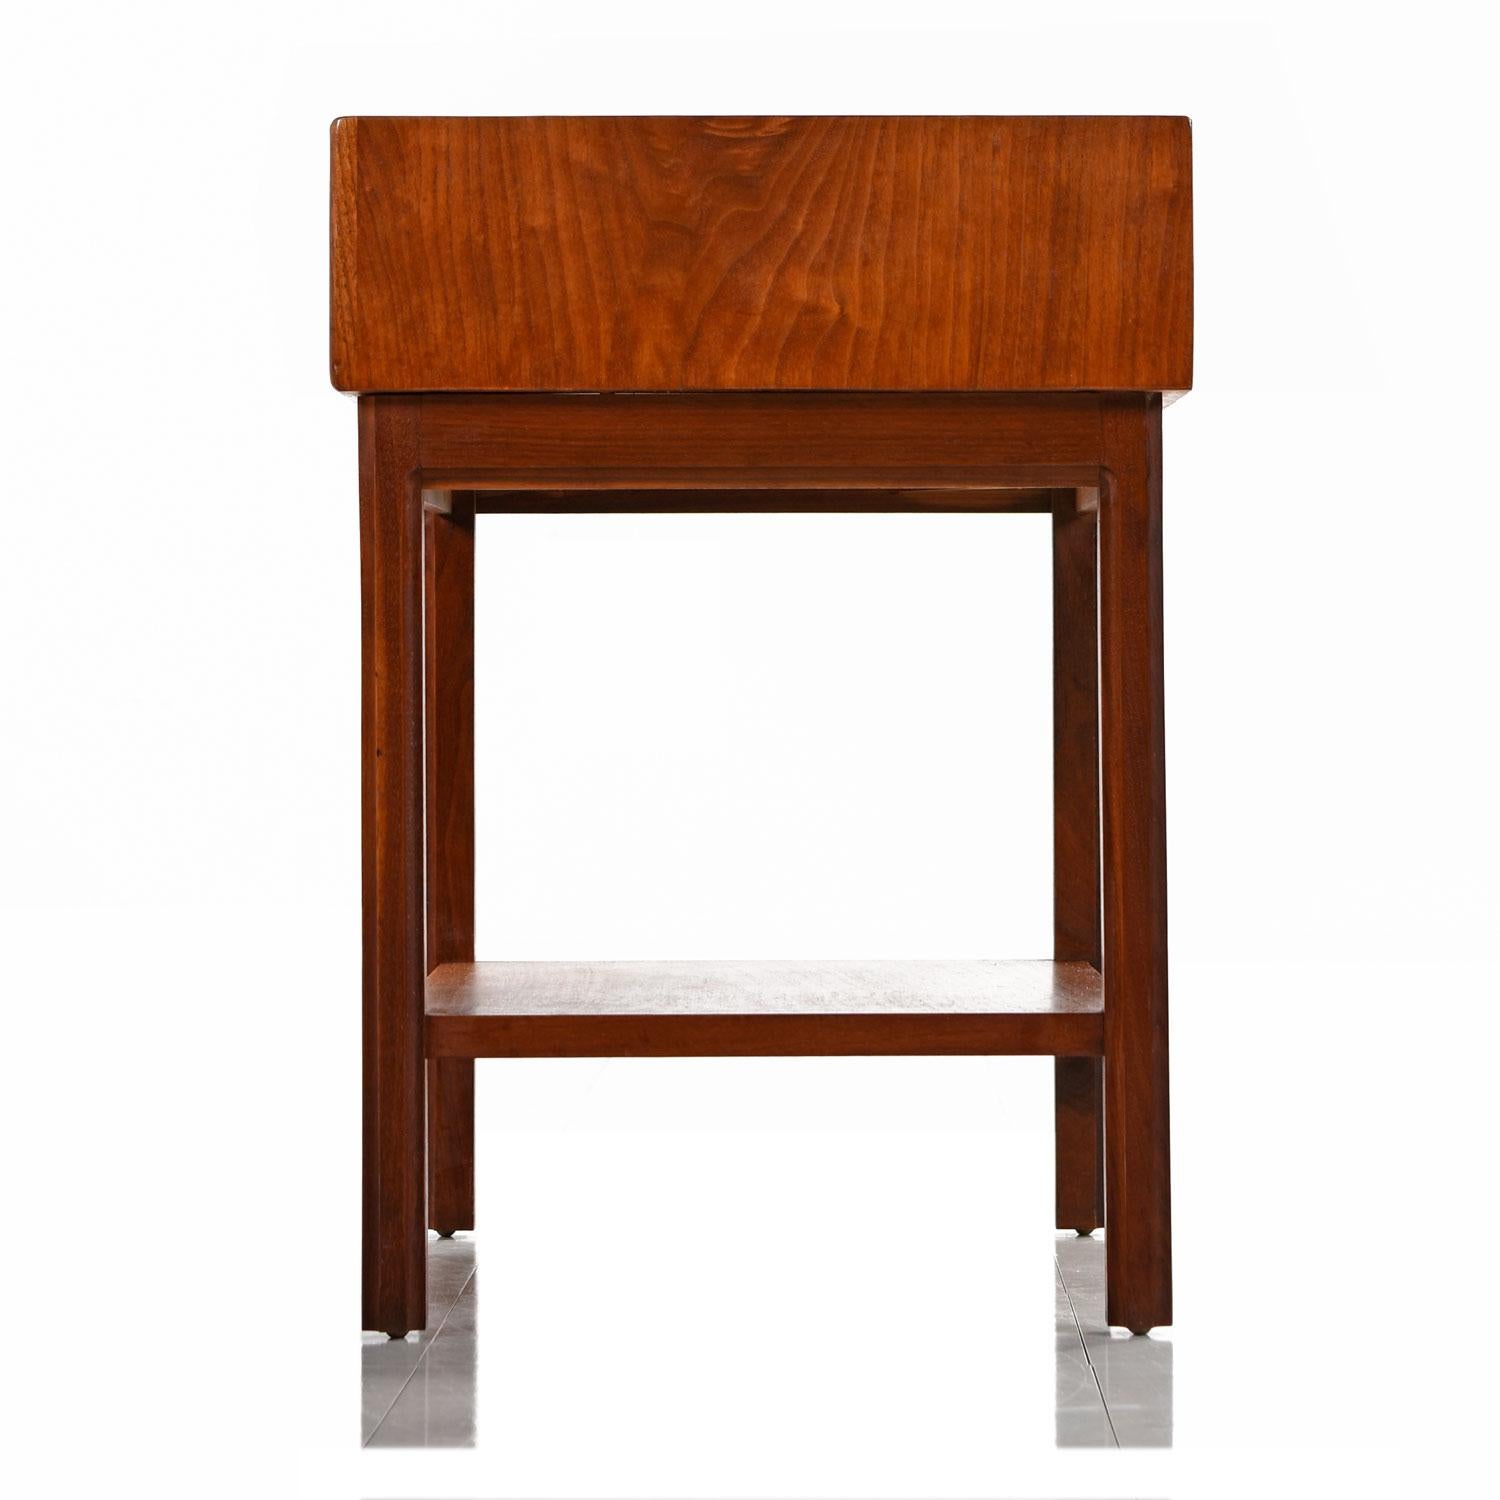 Mid-20th Century Jack Cartwright for Founders Walnut Nightstand End Table, Mid-Century Modern